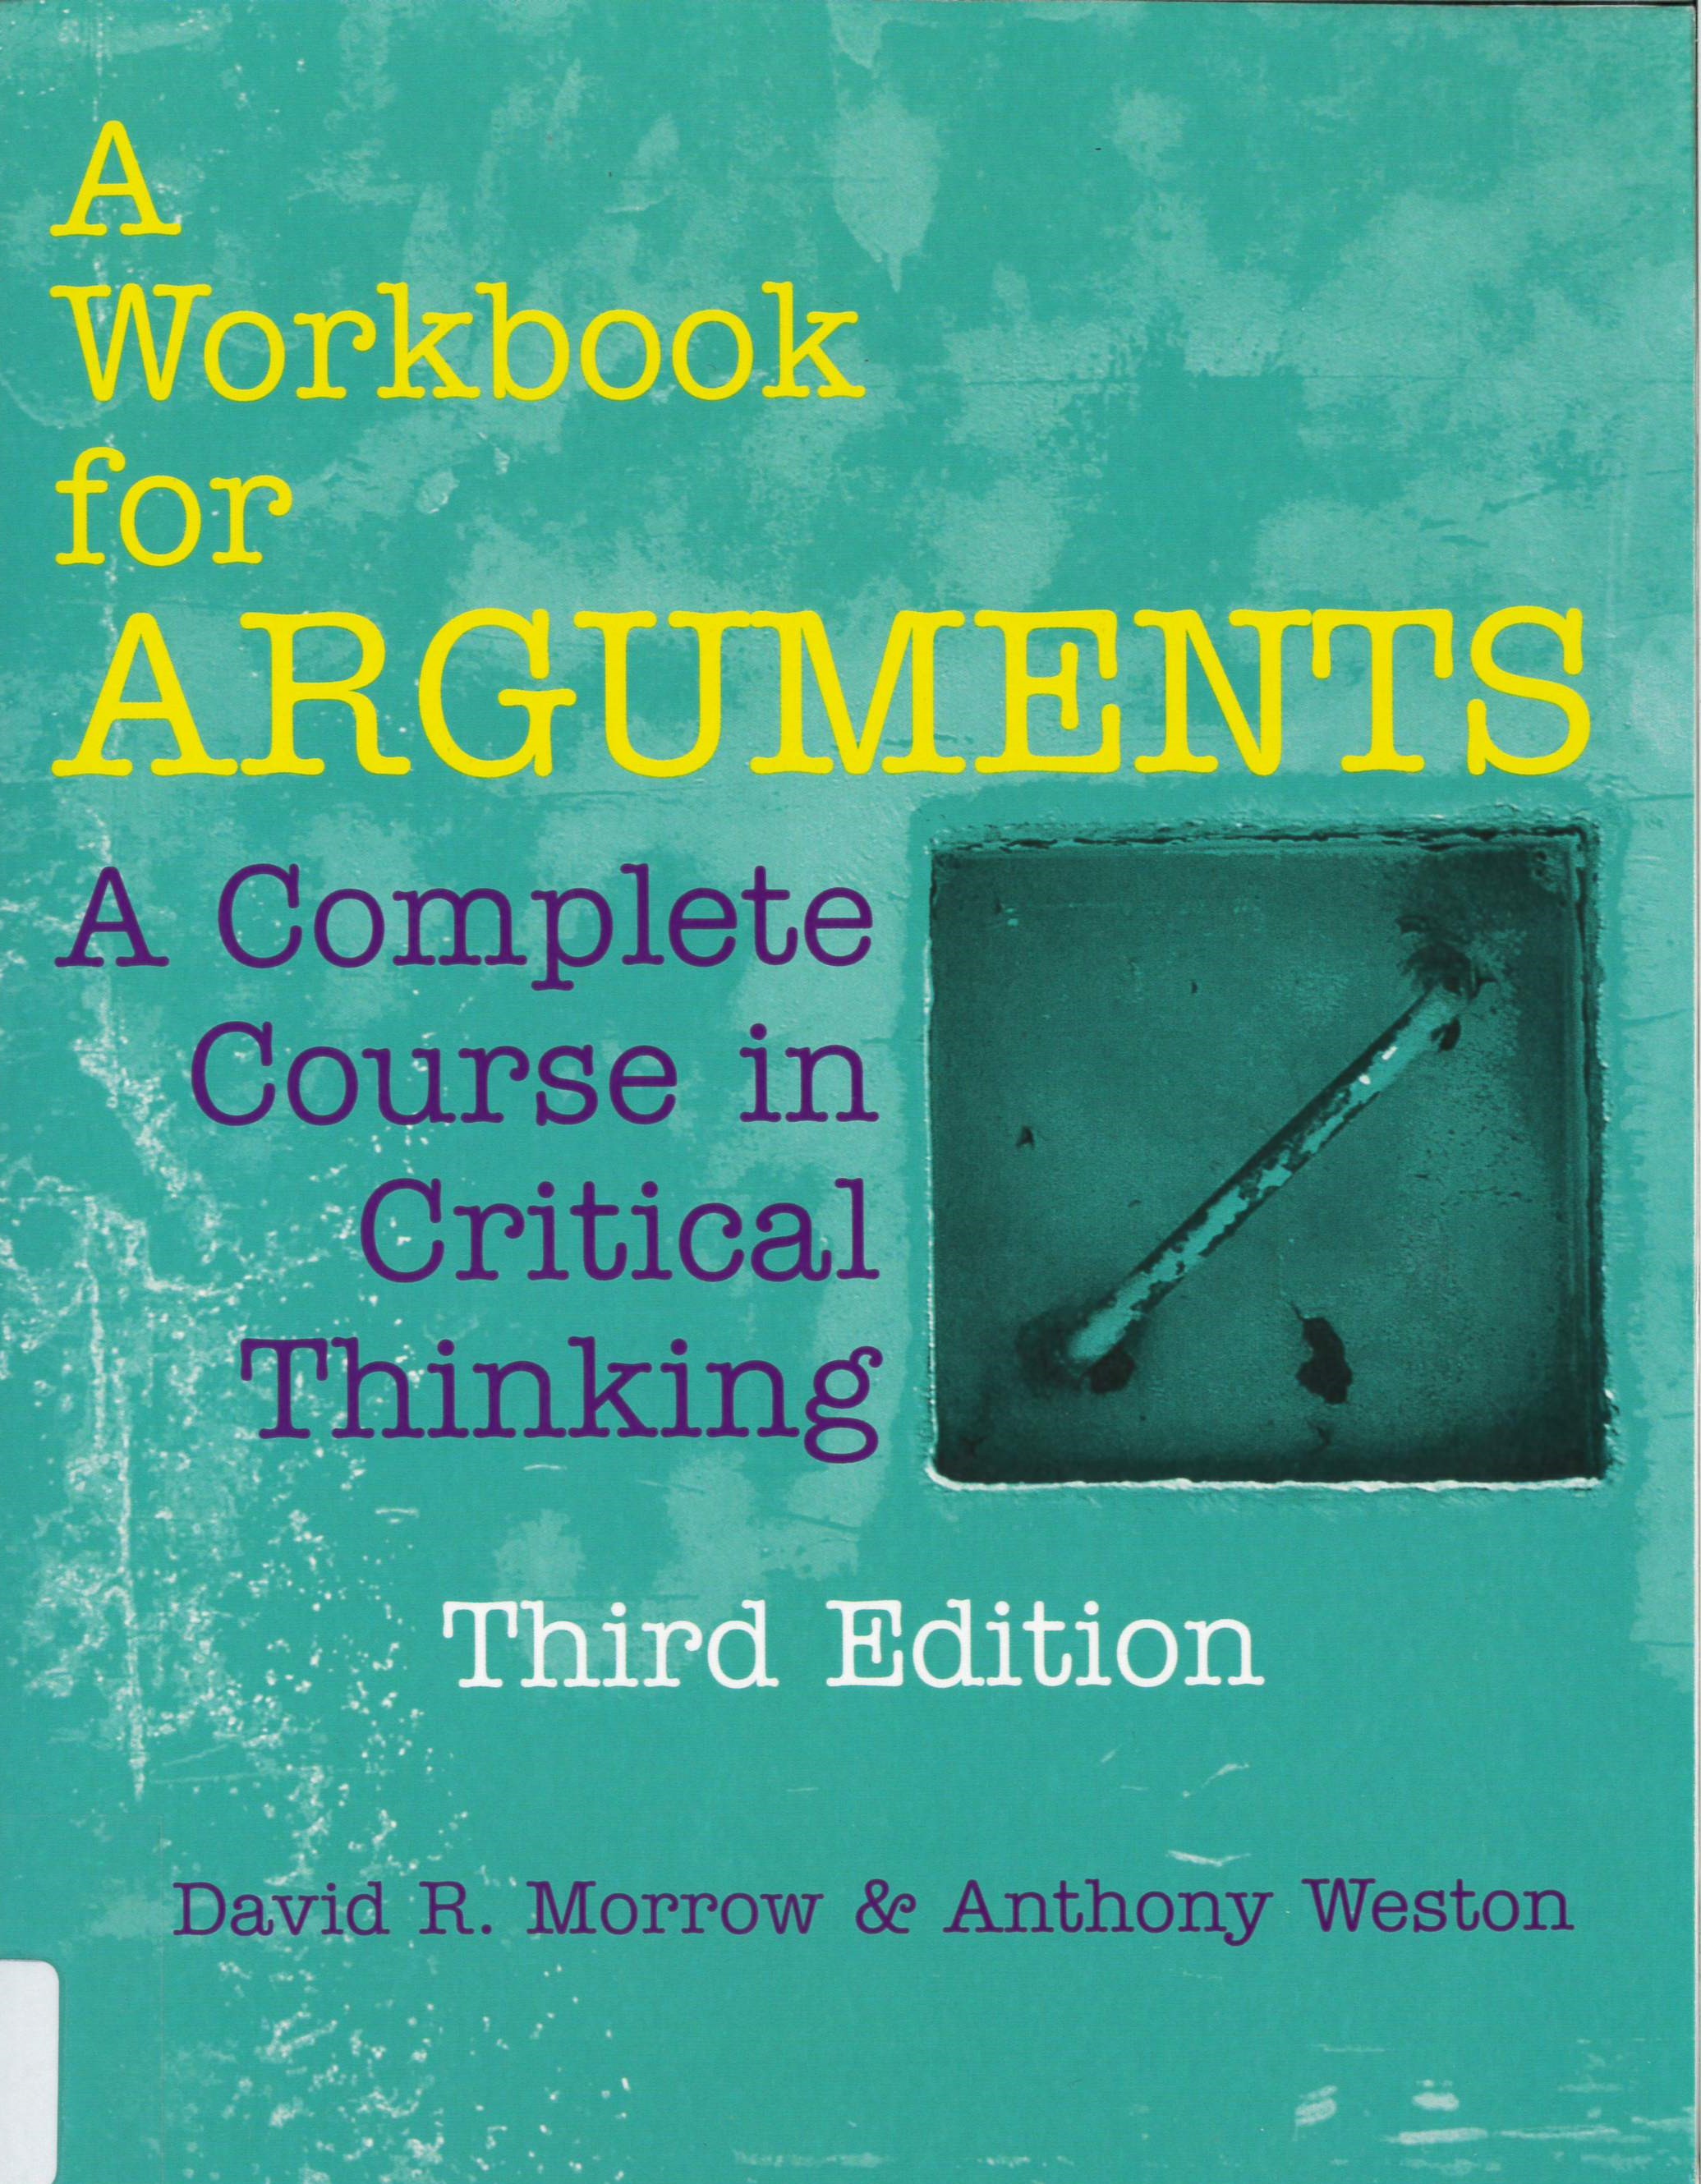 A workbook for arguments: a complete course in critical thinking / David R. Morrow & Anthony Weston.